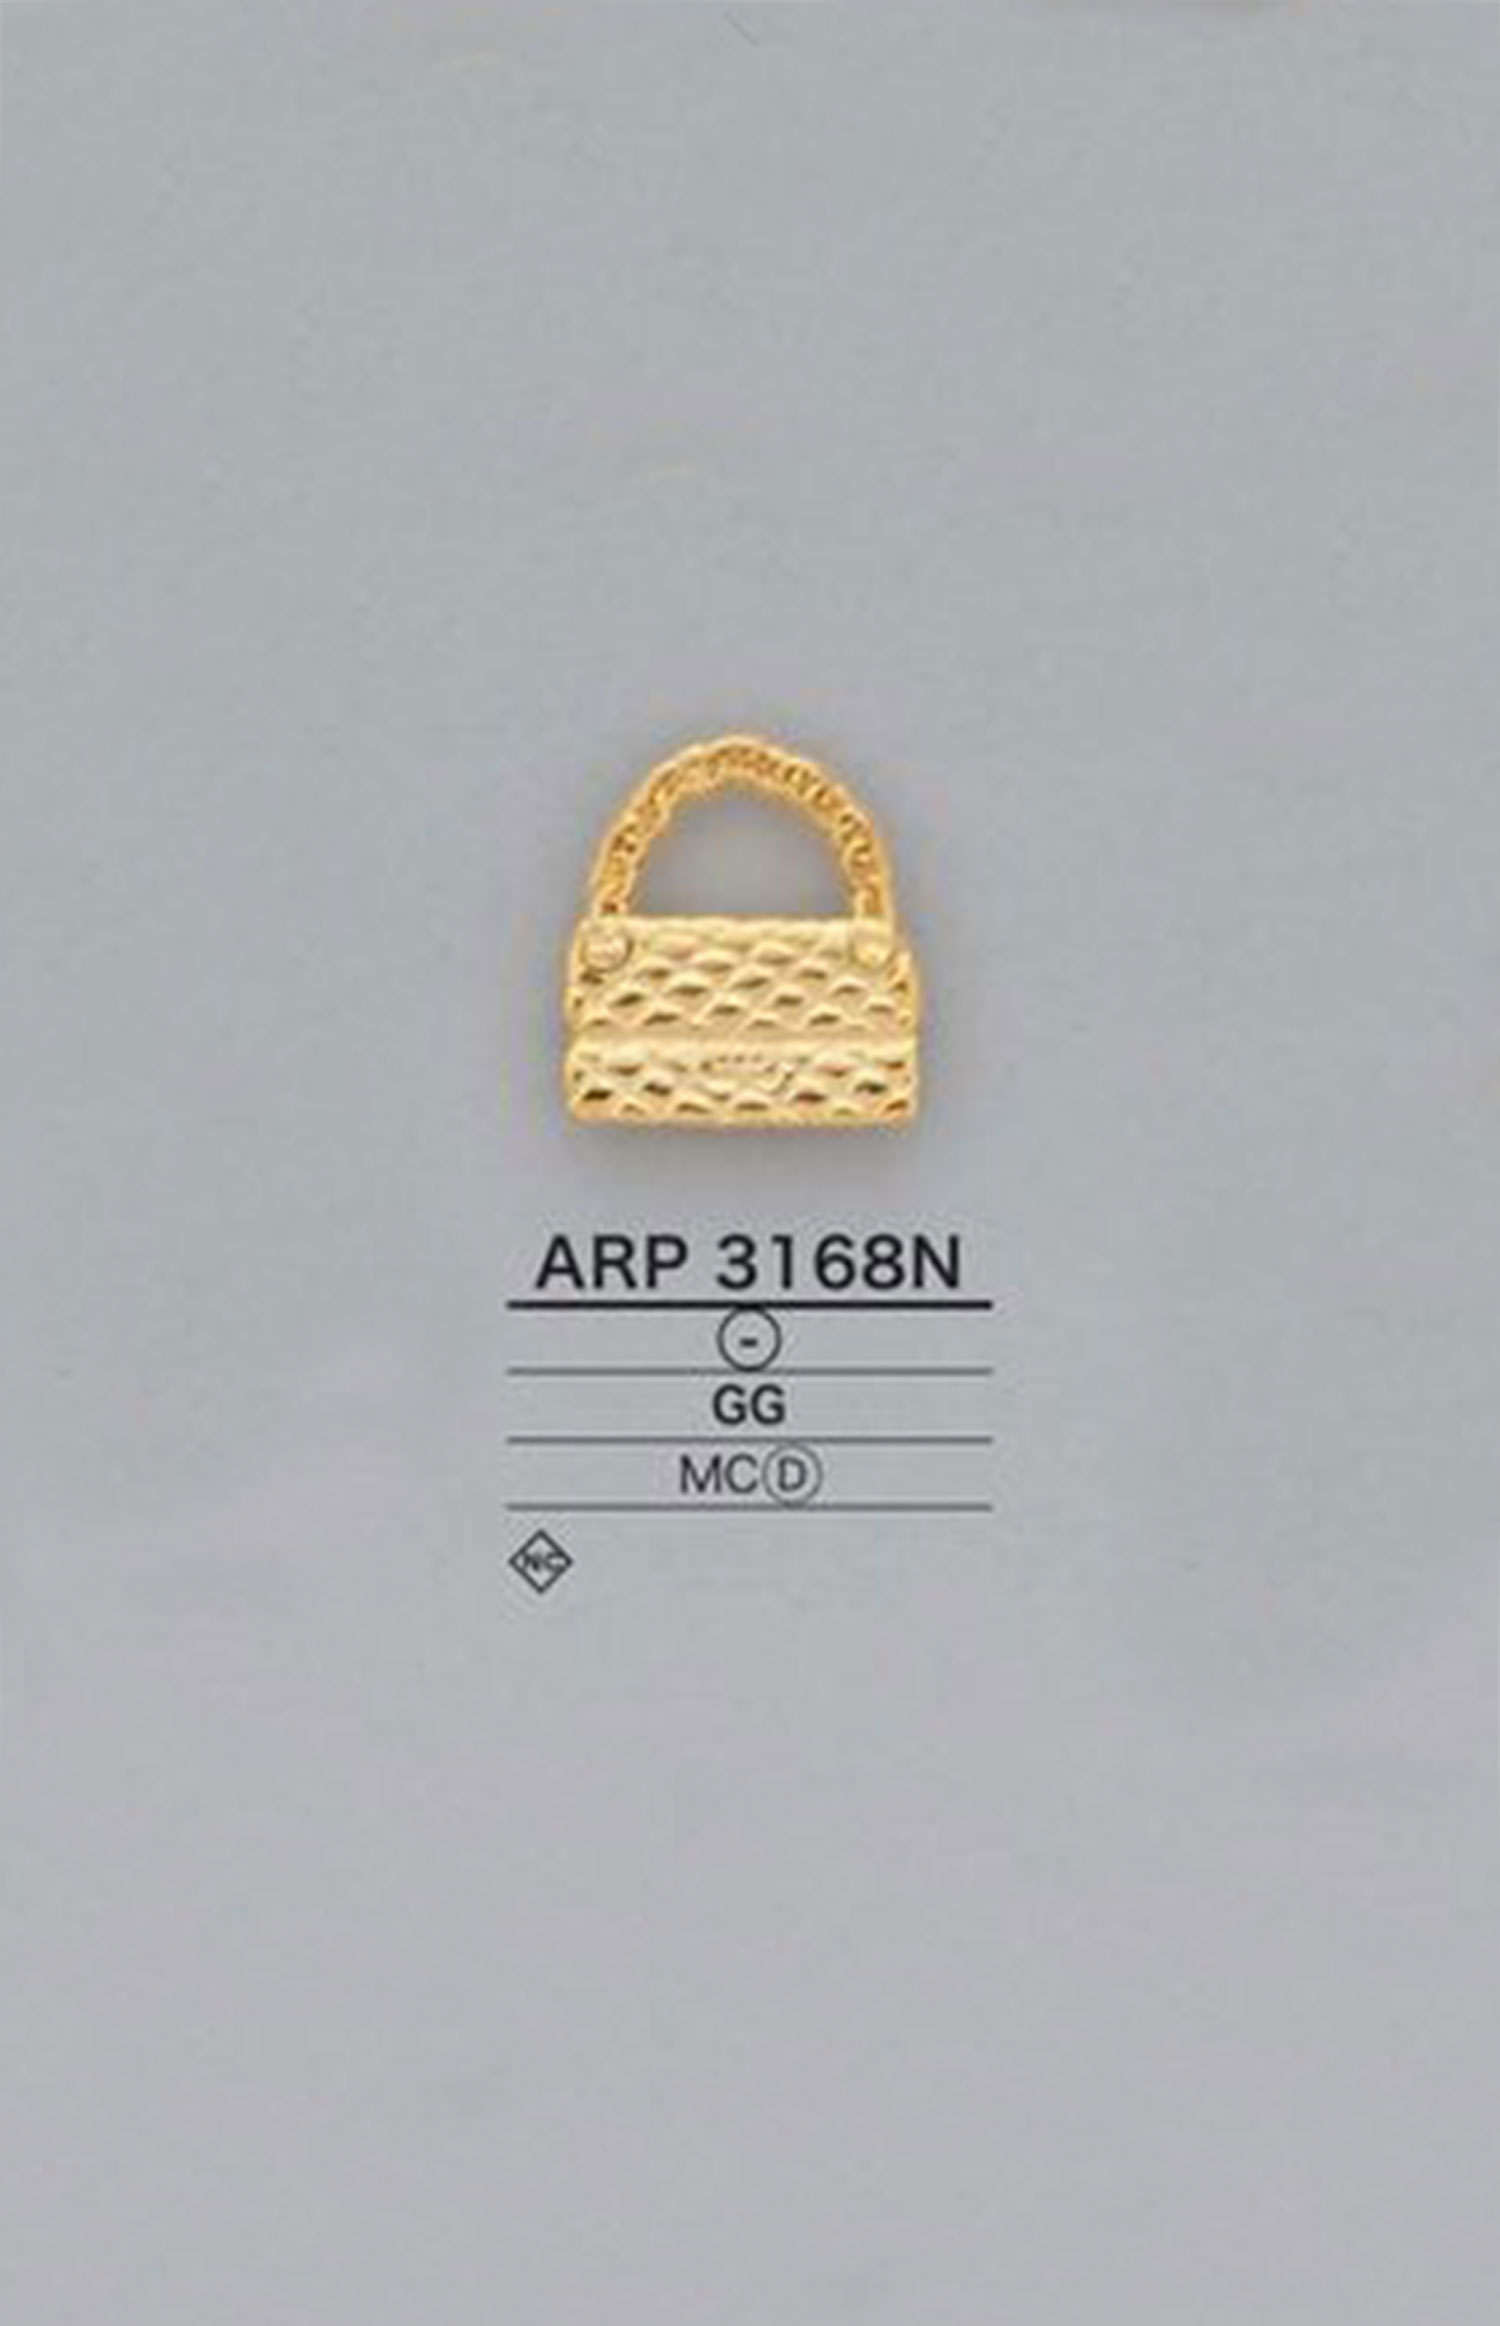 ARP3168N Bag Type Motif Parts[Miscellaneous Goods And Others] IRIS